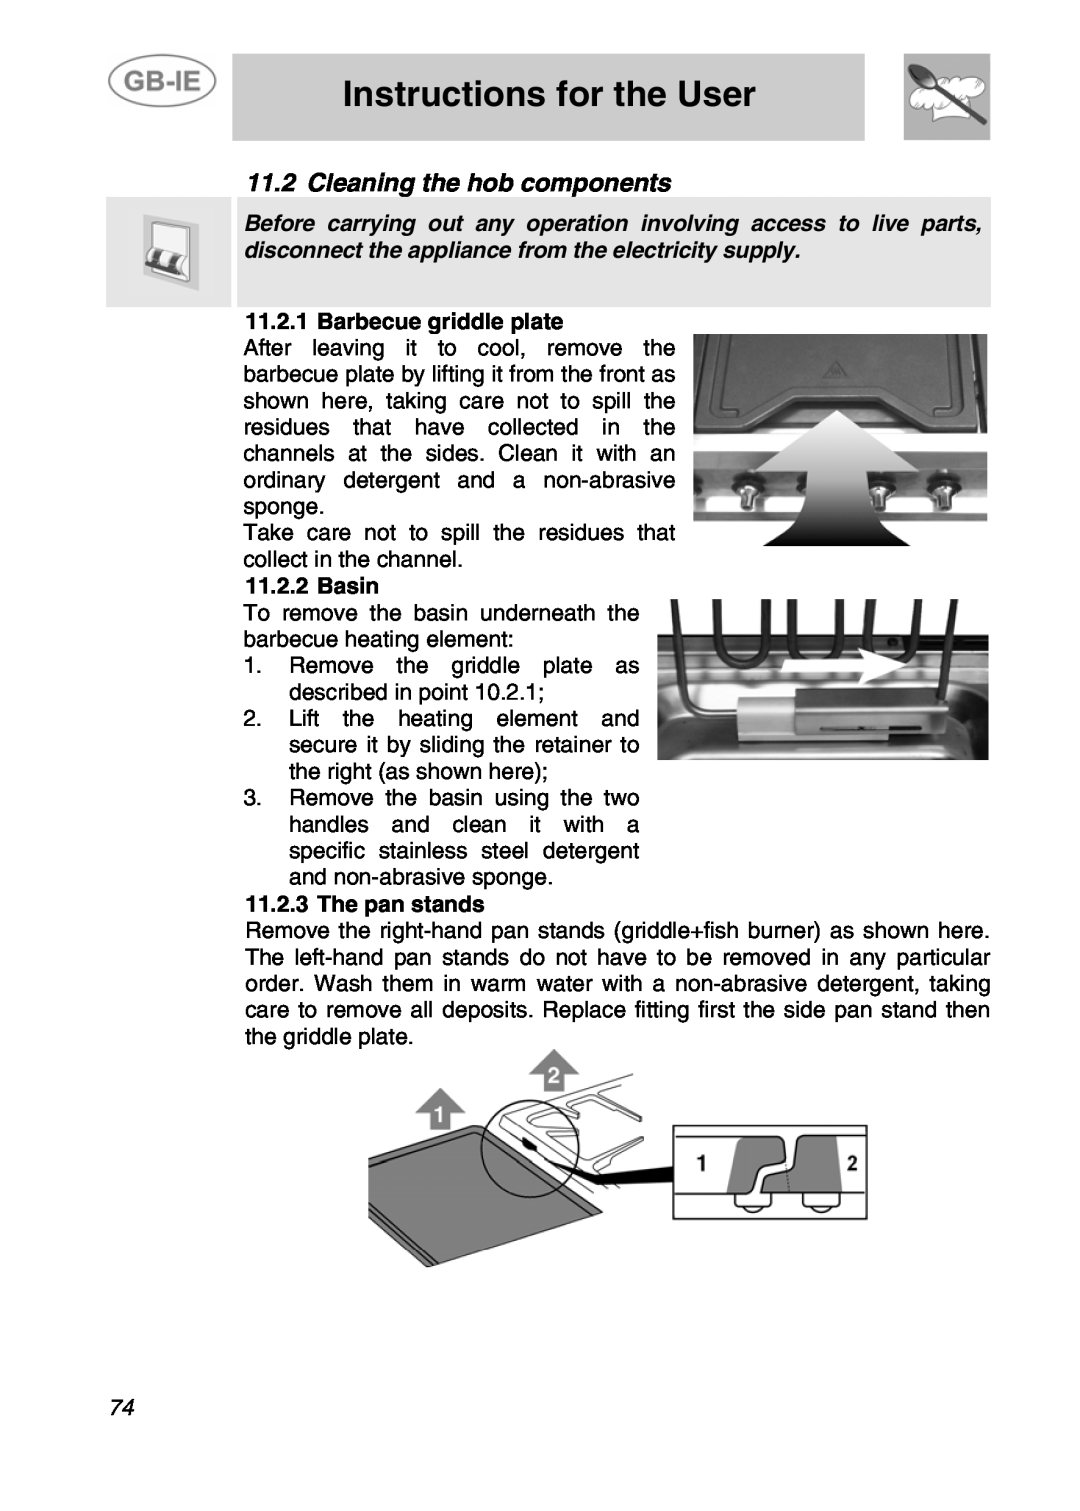 Smeg A4-5 Cleaning the hob components, Barbecue griddle plate, Basin, 11.2.3The pan stands, Instructions for the User 